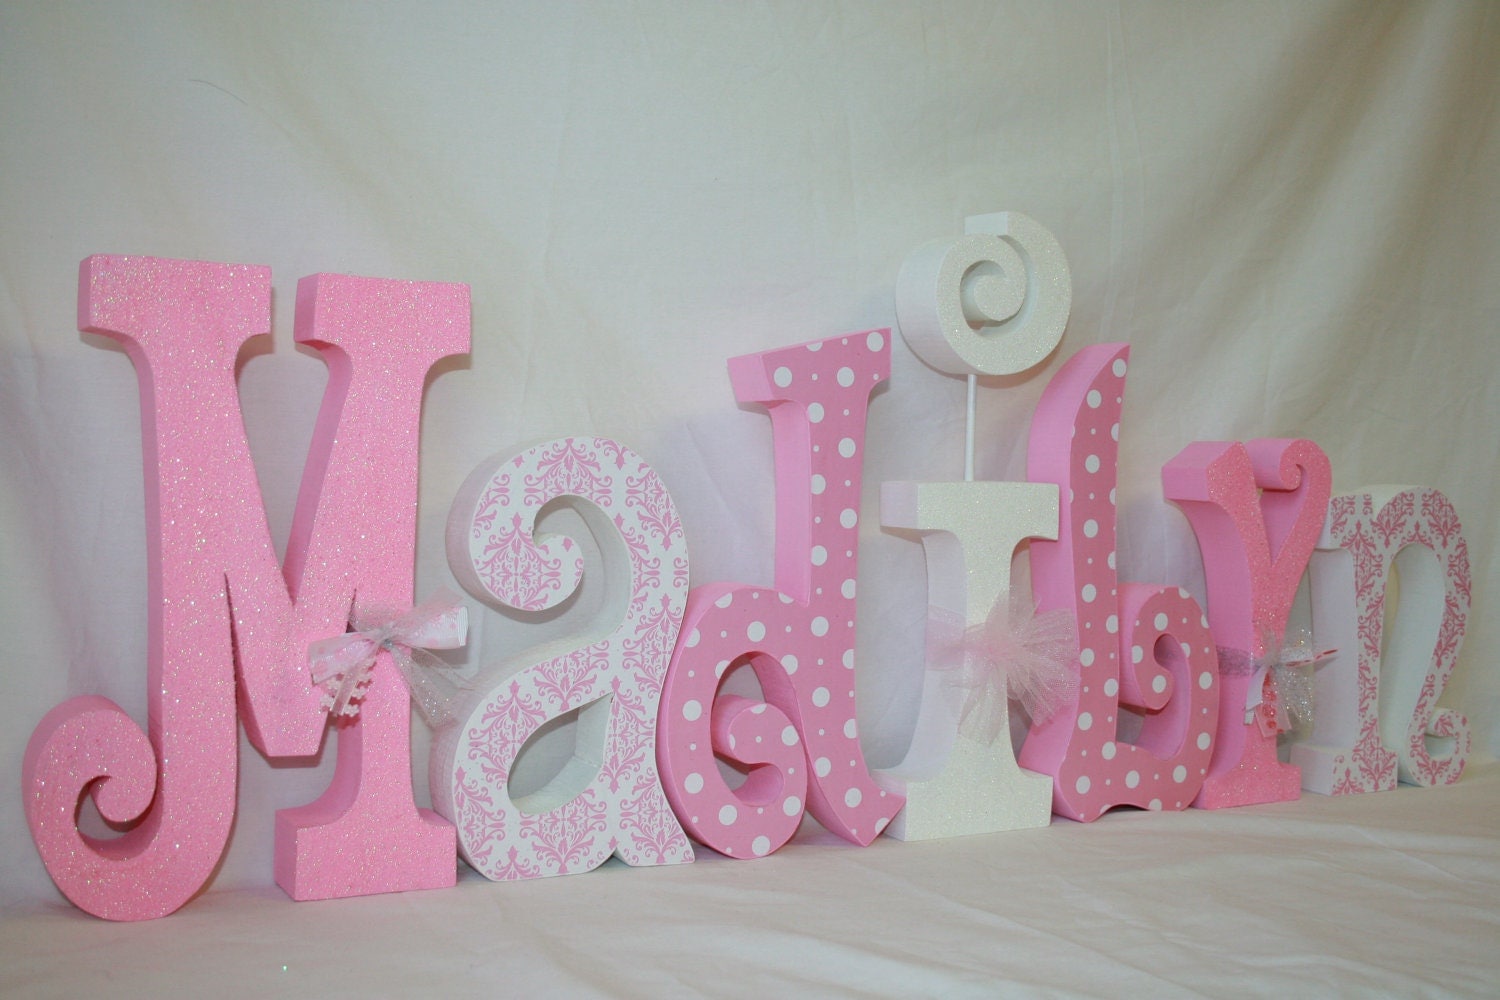 Popular items for letters for nursery on Etsy